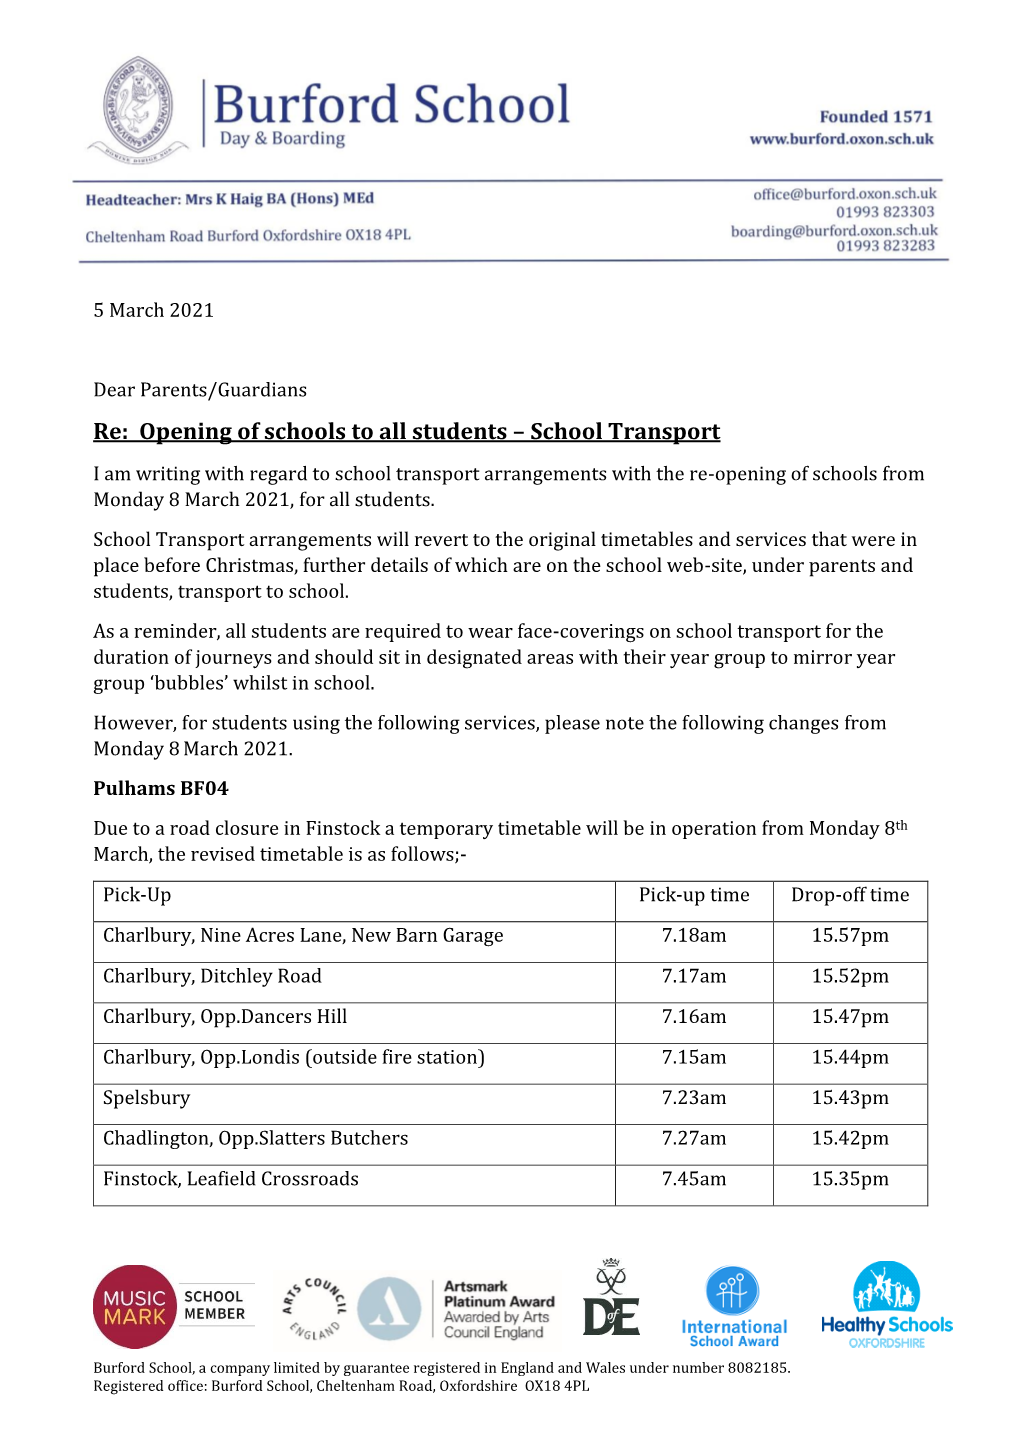 Re: Opening of Schools to All Students – School Transport